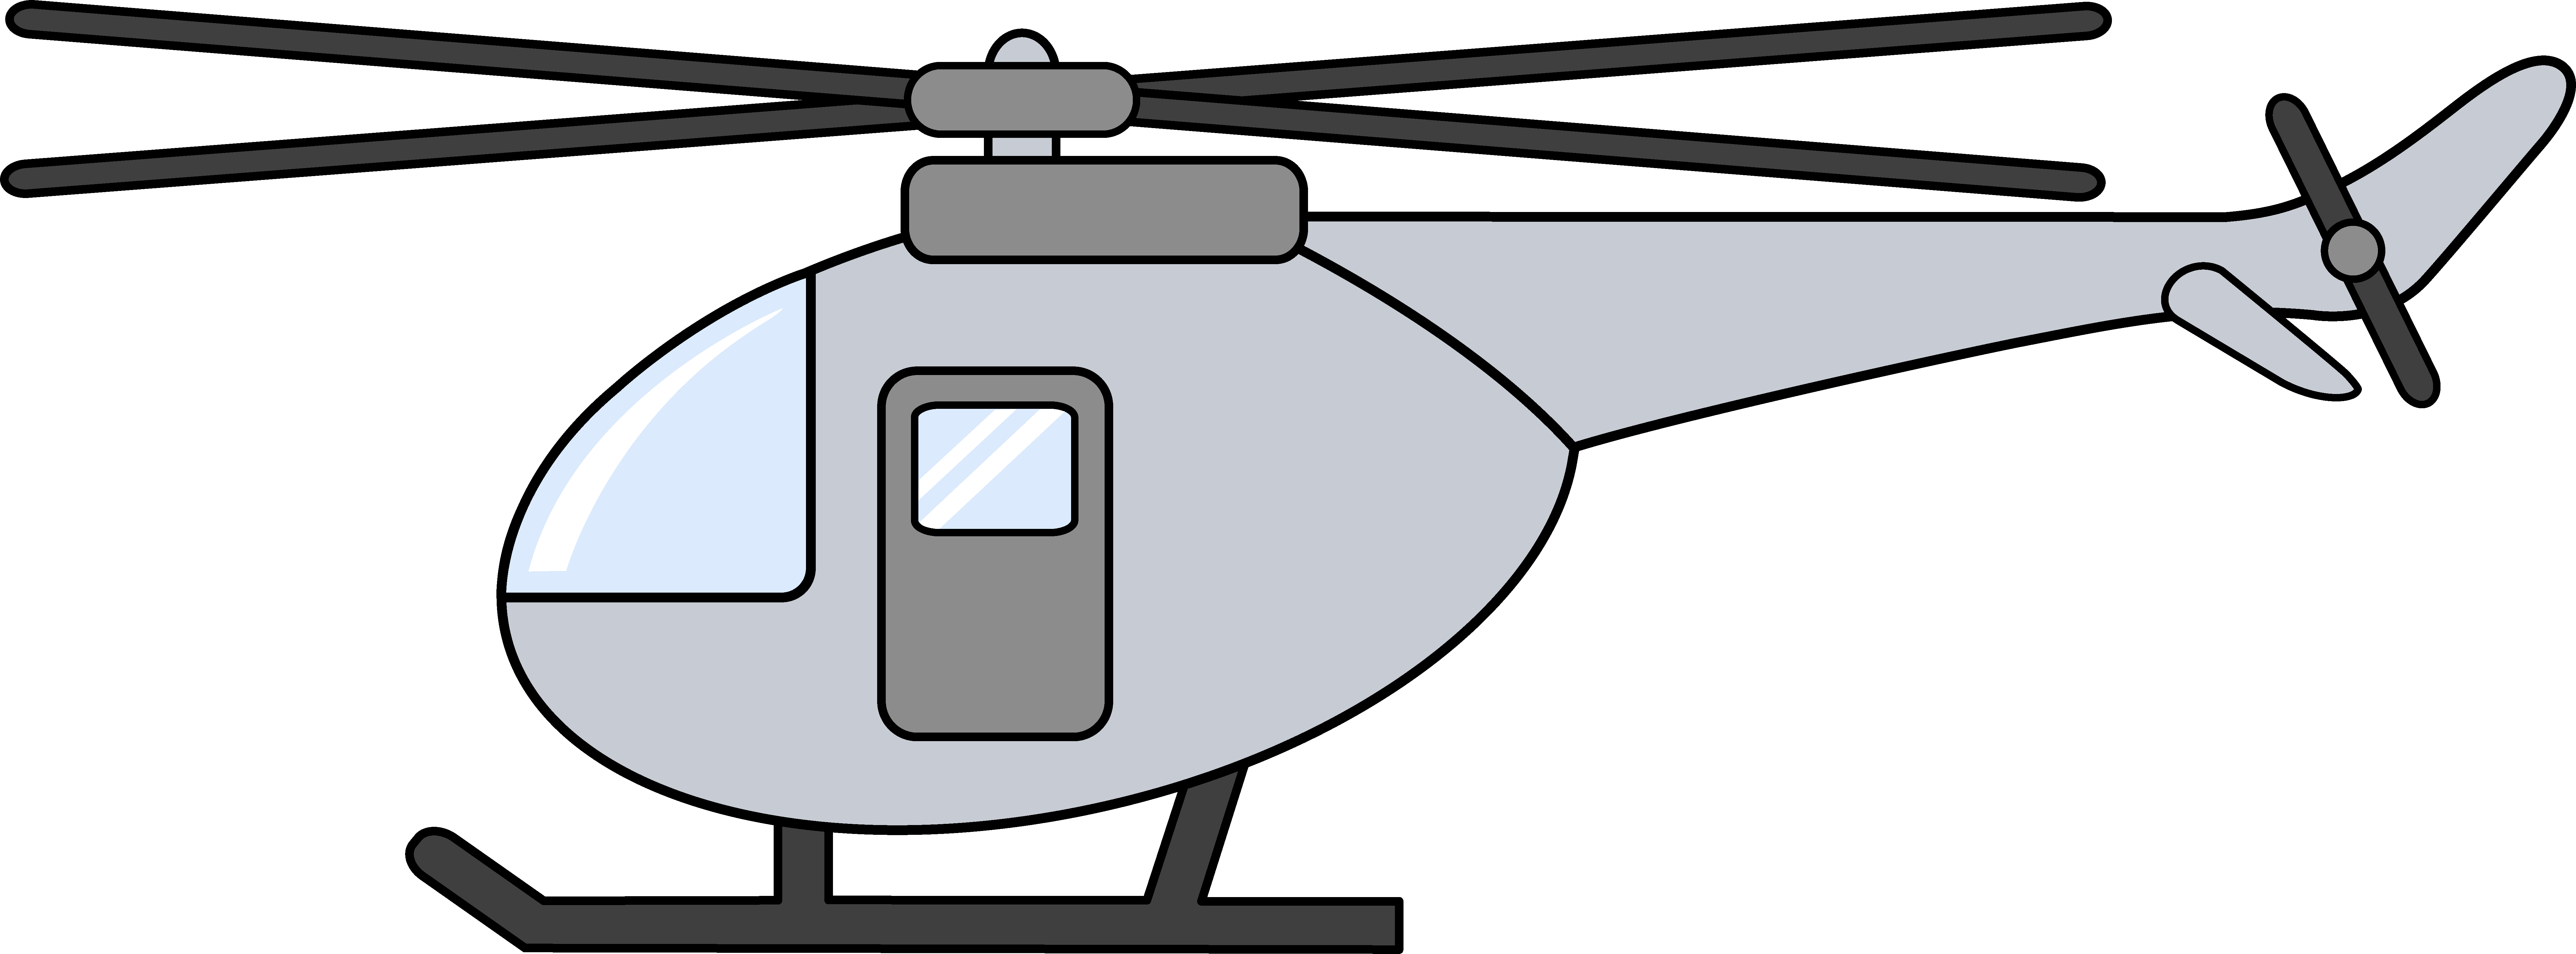 free clipart cartoon helicopter - photo #5